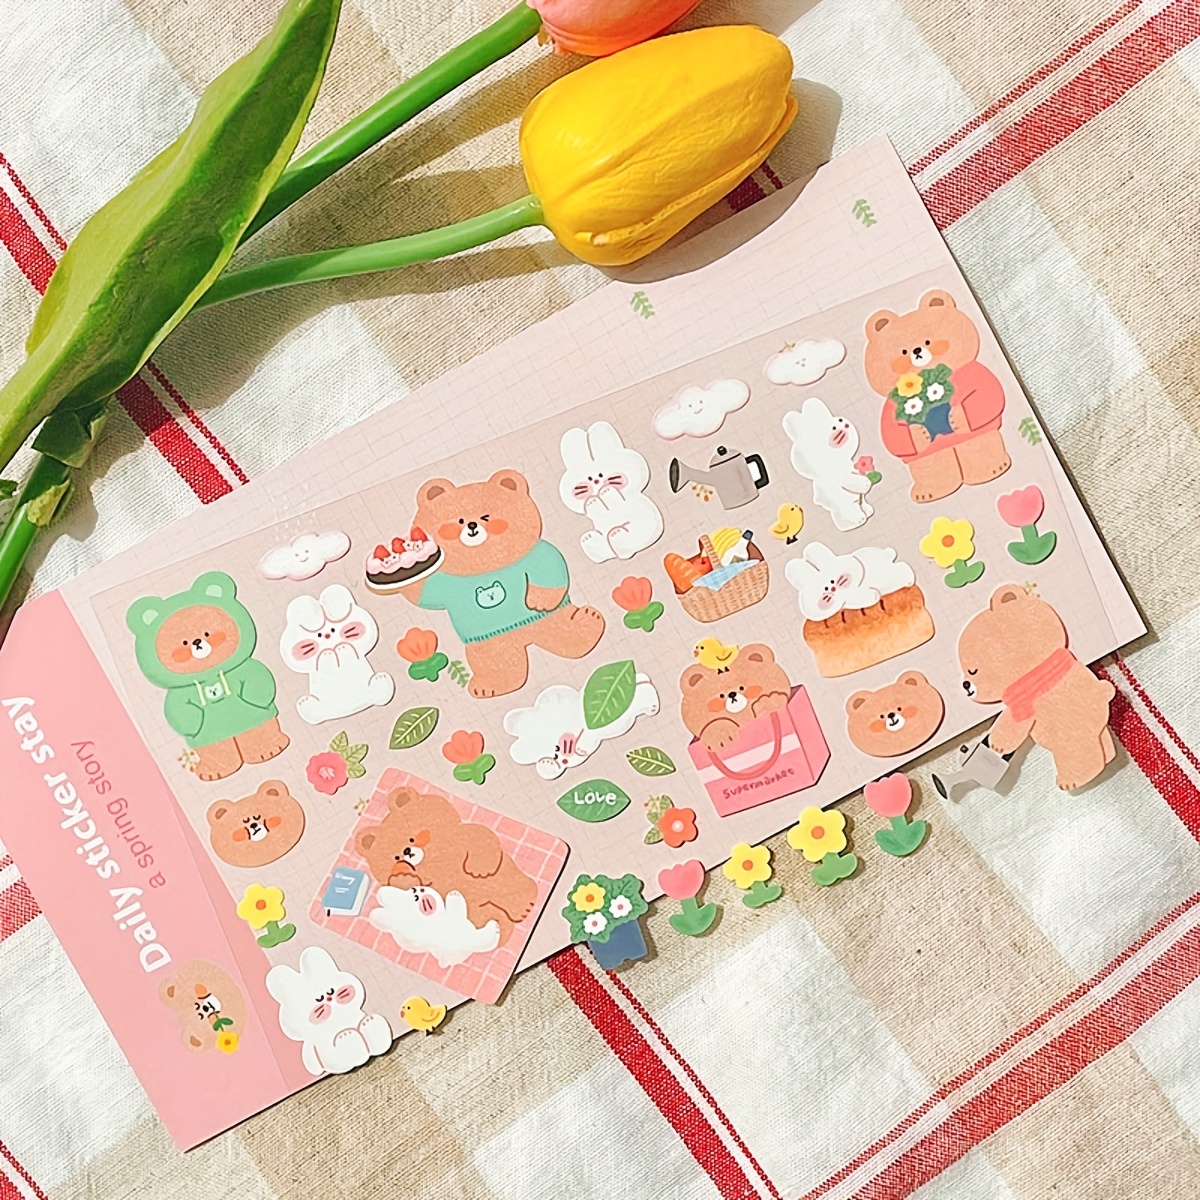 45 Pcs/box Cute Rabbit Daily Kawaii Decoration Stickers Planner  Scrapbooking Stationery Diary Stickers